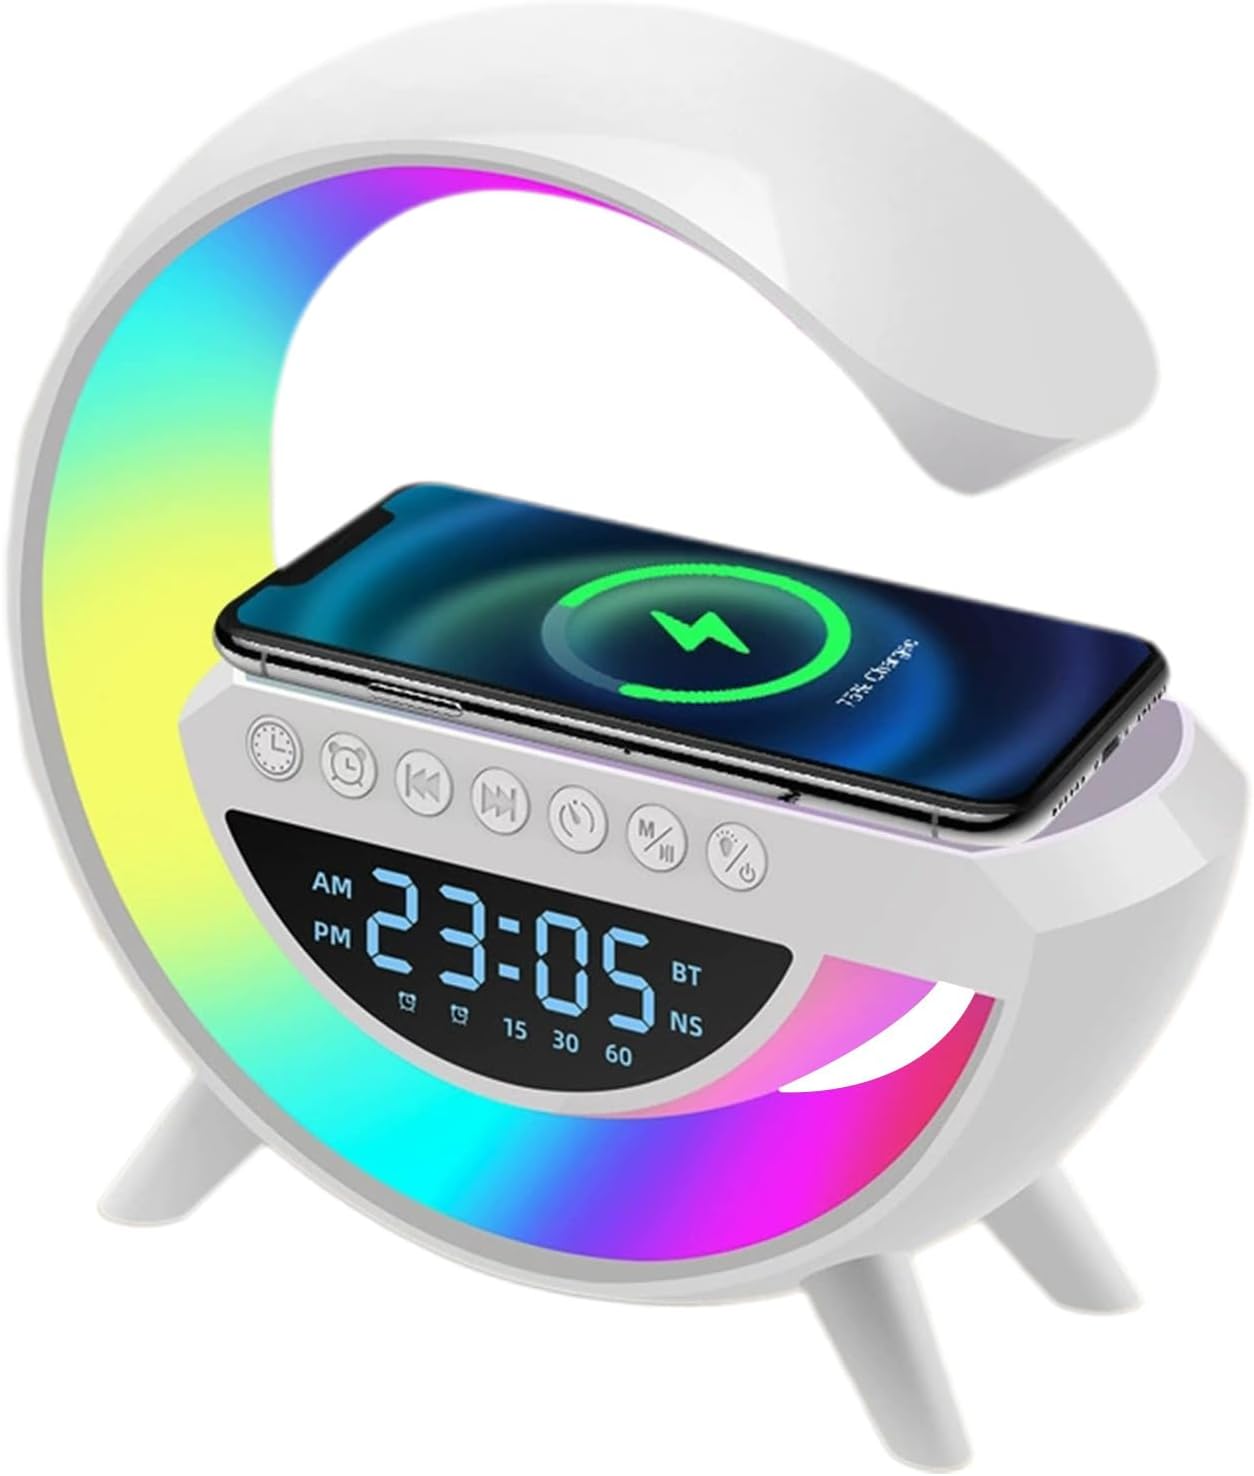 ChargeHub Speaker, RGB Night Light, and Wireless Charger – Compatible with iPhone, Samsung, Xiaomi, Huawei."